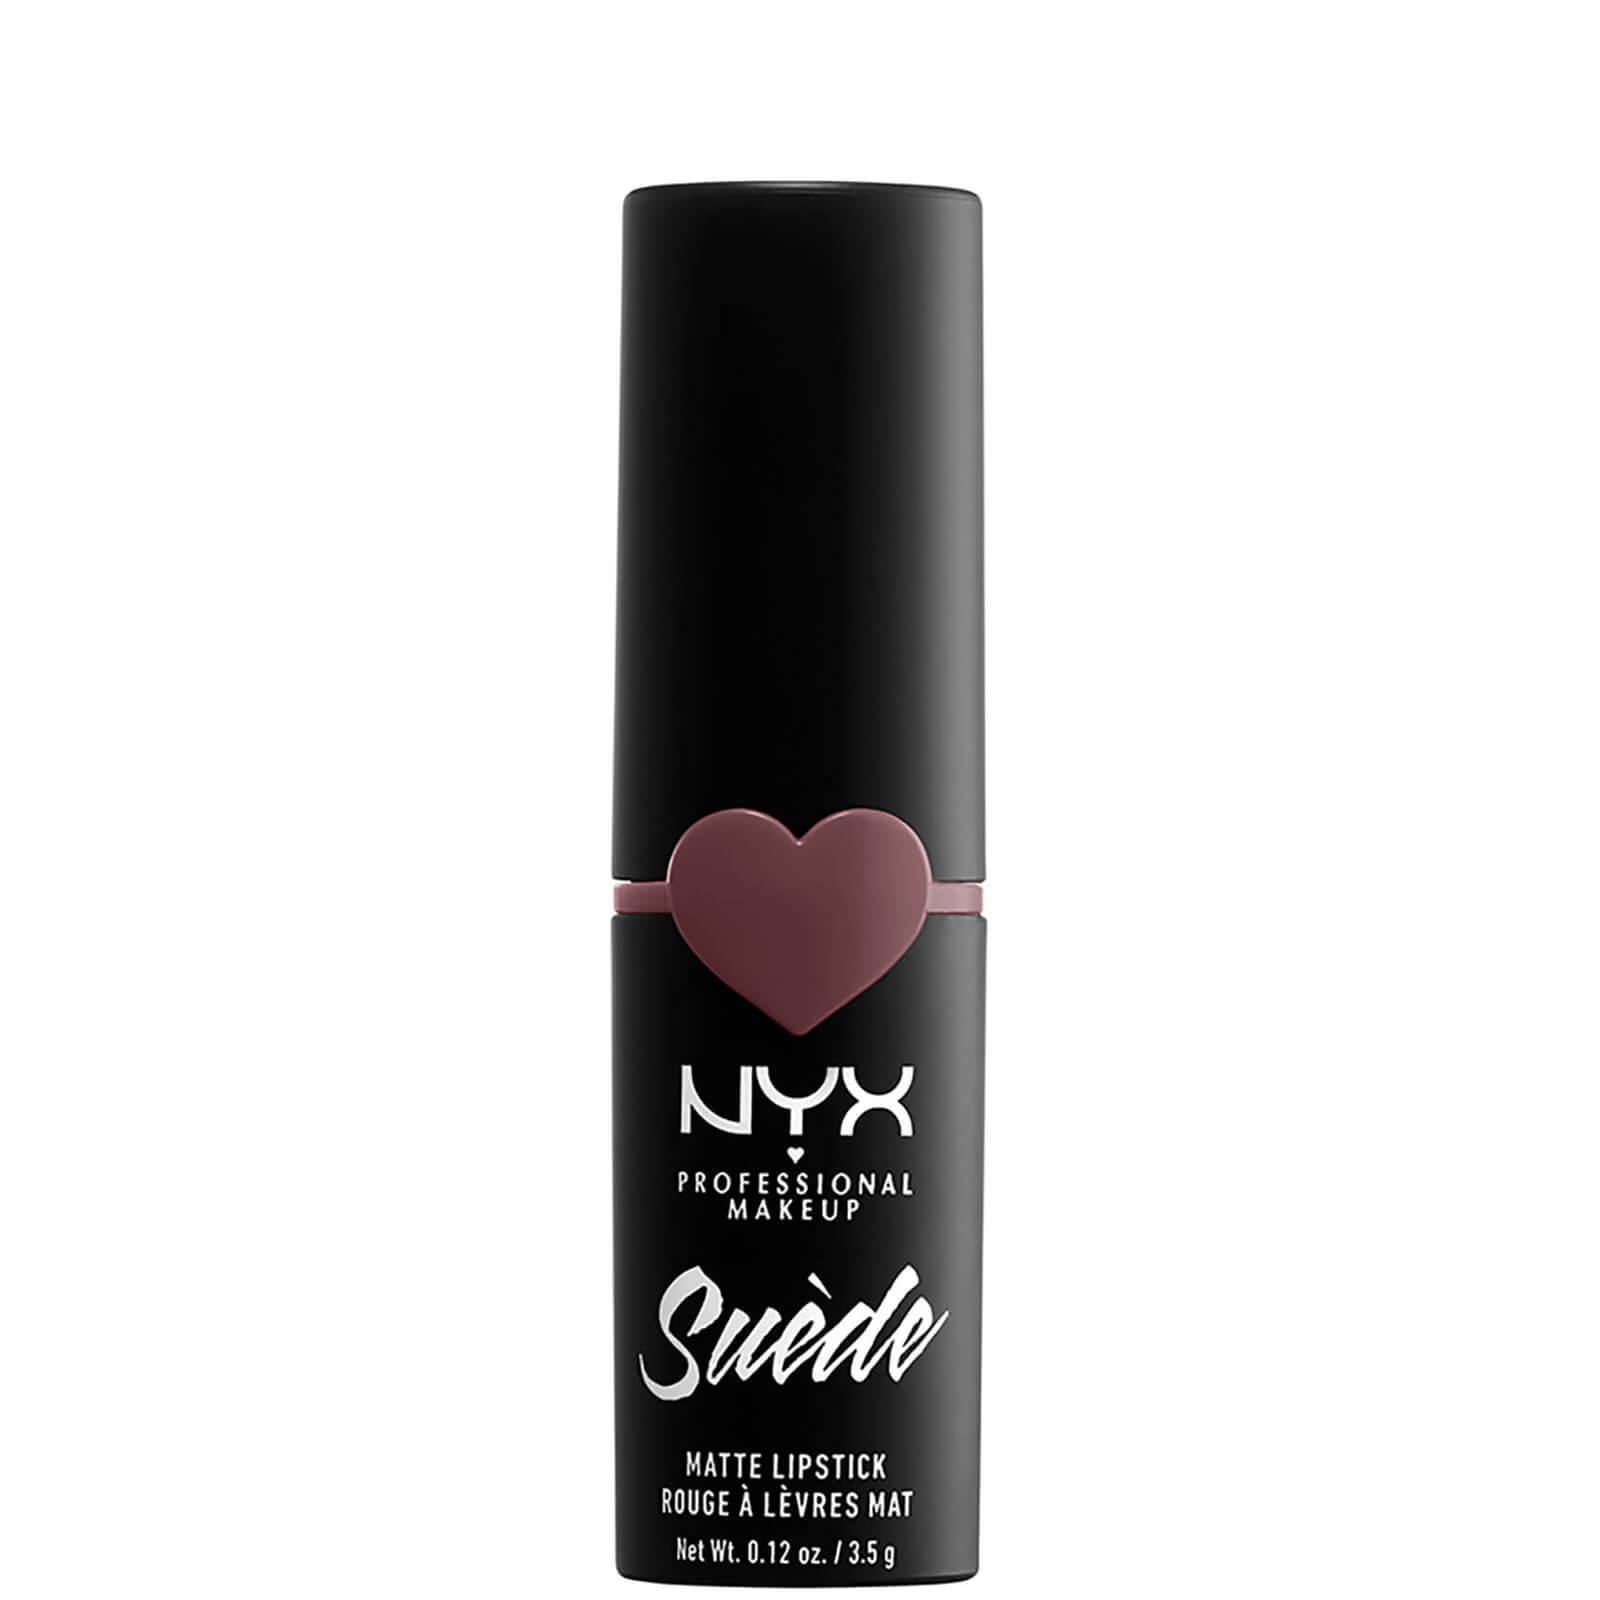 NYX Professional Makeup Suede Matte Lipstick 3.5g (Various Shades) - Lavender & Lace - Dusty Rose